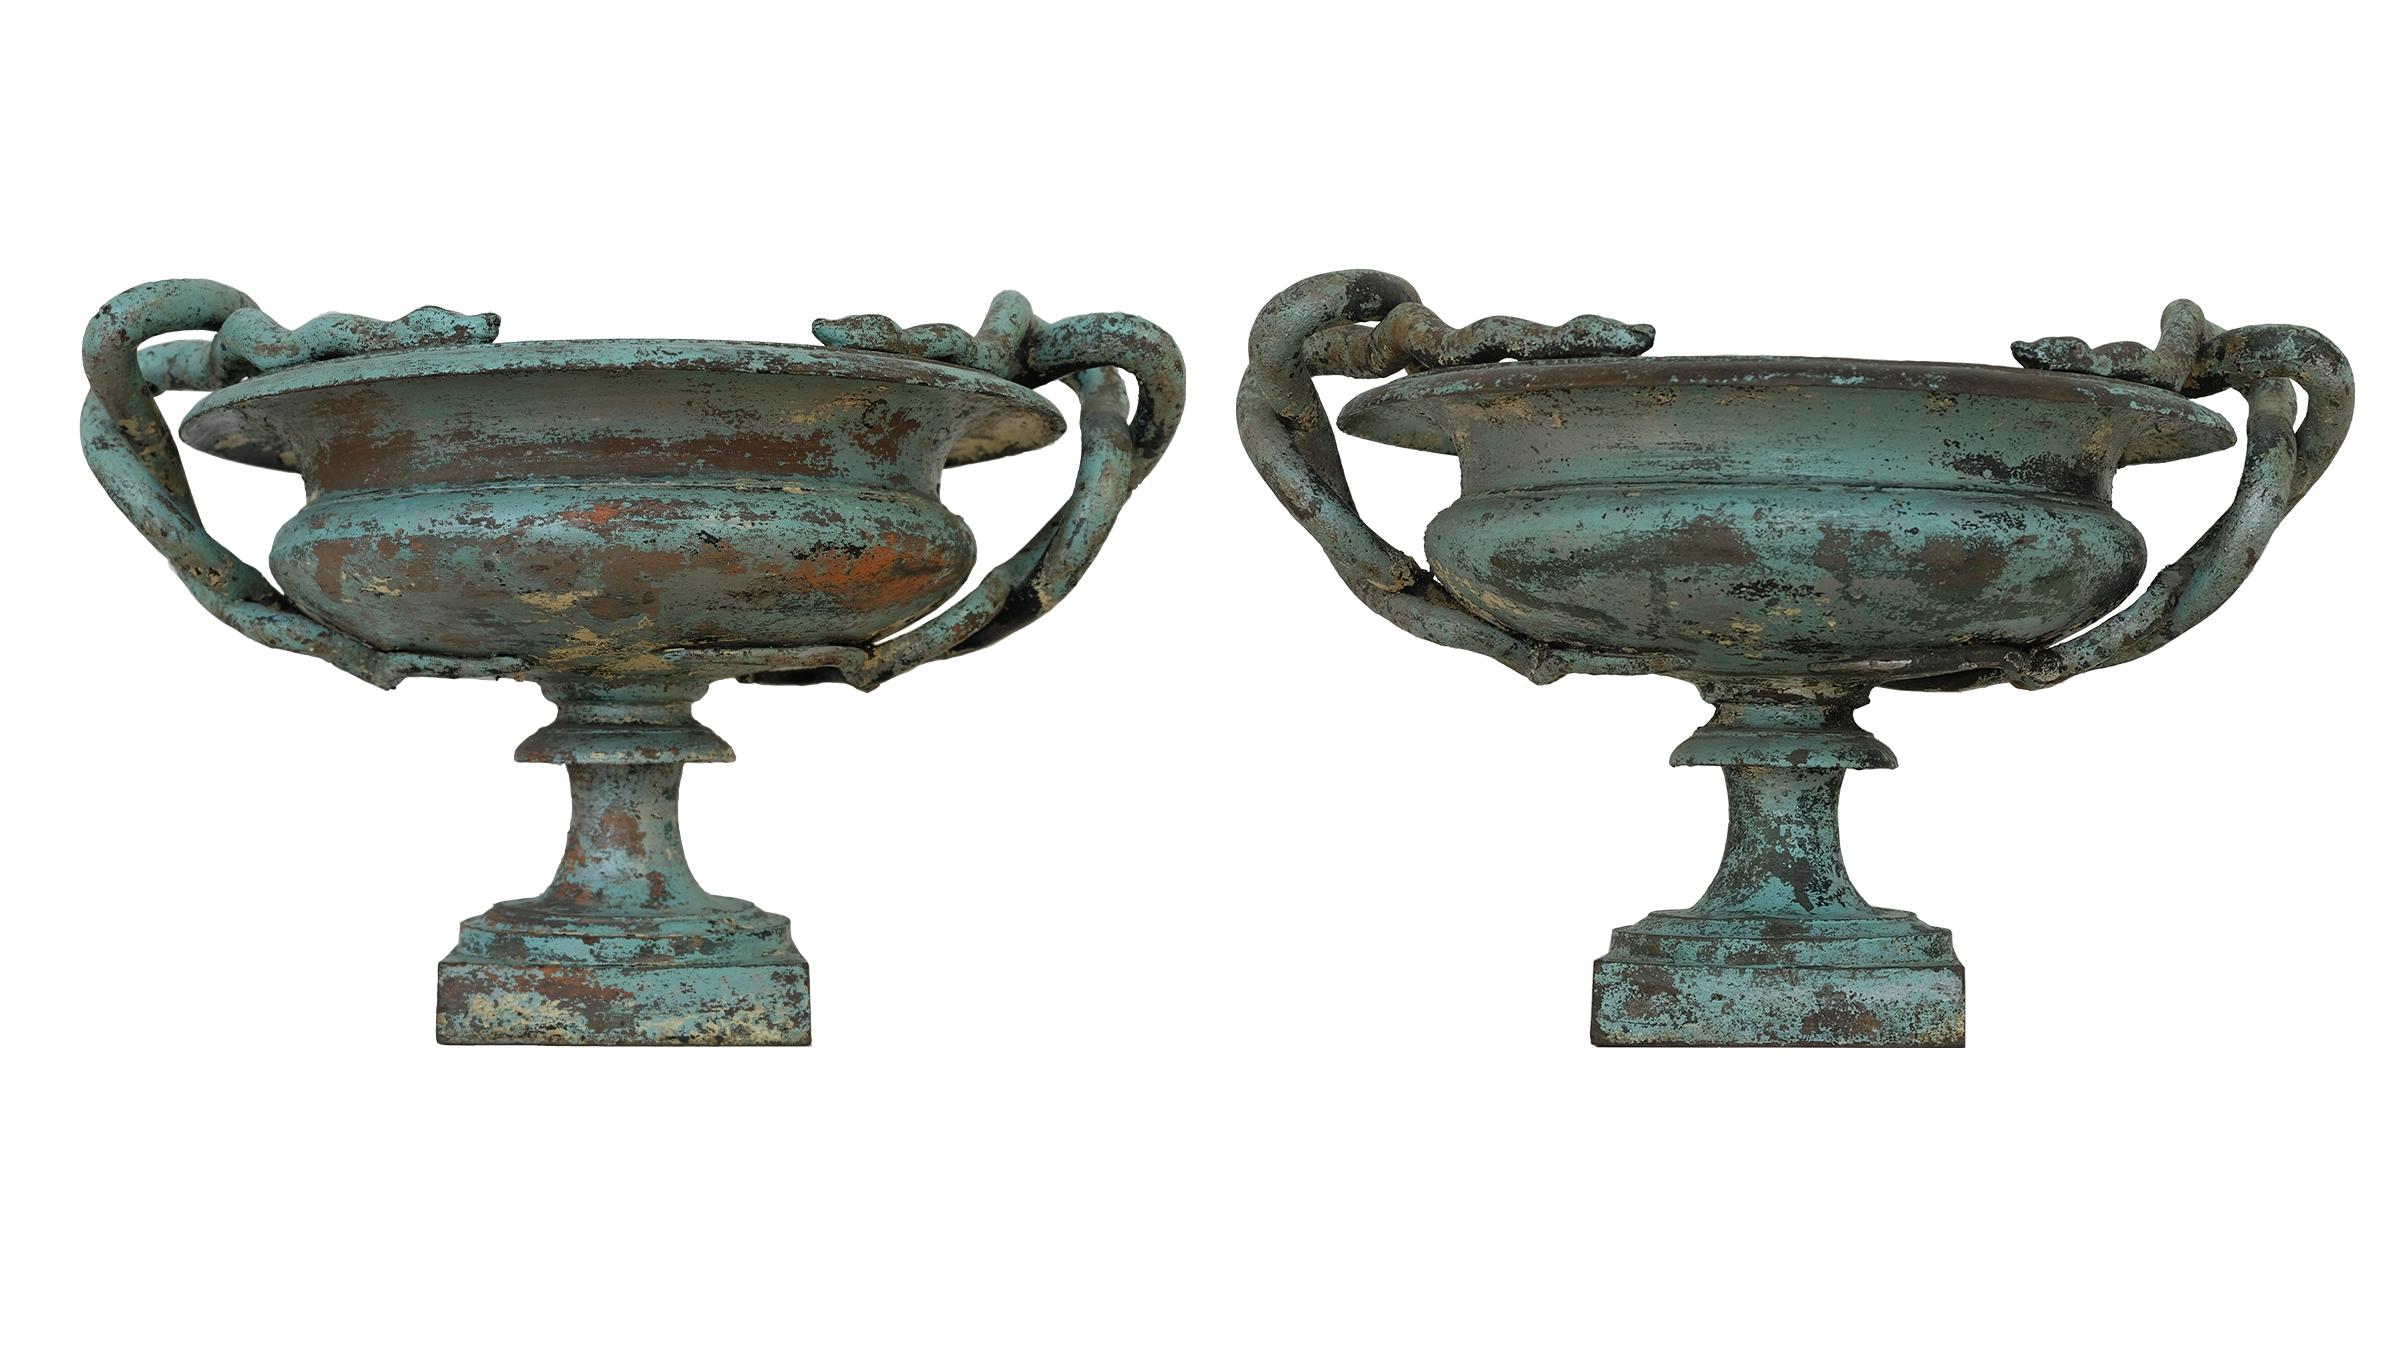 A pair of medium Val d’Osne cast iron snake urns with a robin’s egg blue patina. Exquisite tones of brown rust and very rare robin's egg blue patina. Marked with the number 2 denoting the medium size of the three sizes made by the renown Val d'Osne